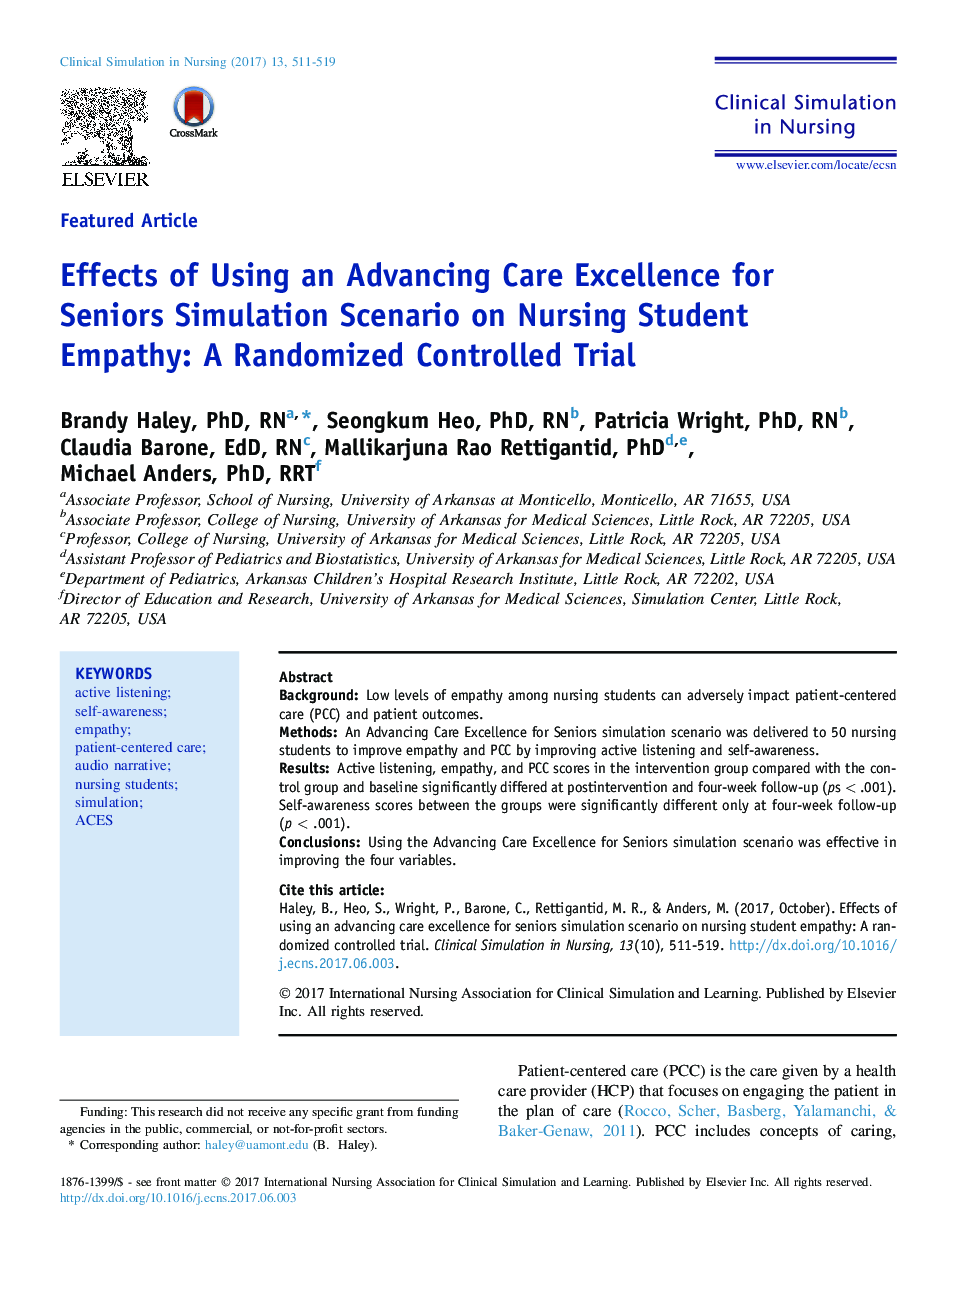 Effects of Using an Advancing Care Excellence for Seniors Simulation Scenario on Nursing Student Empathy: A Randomized Controlled Trial